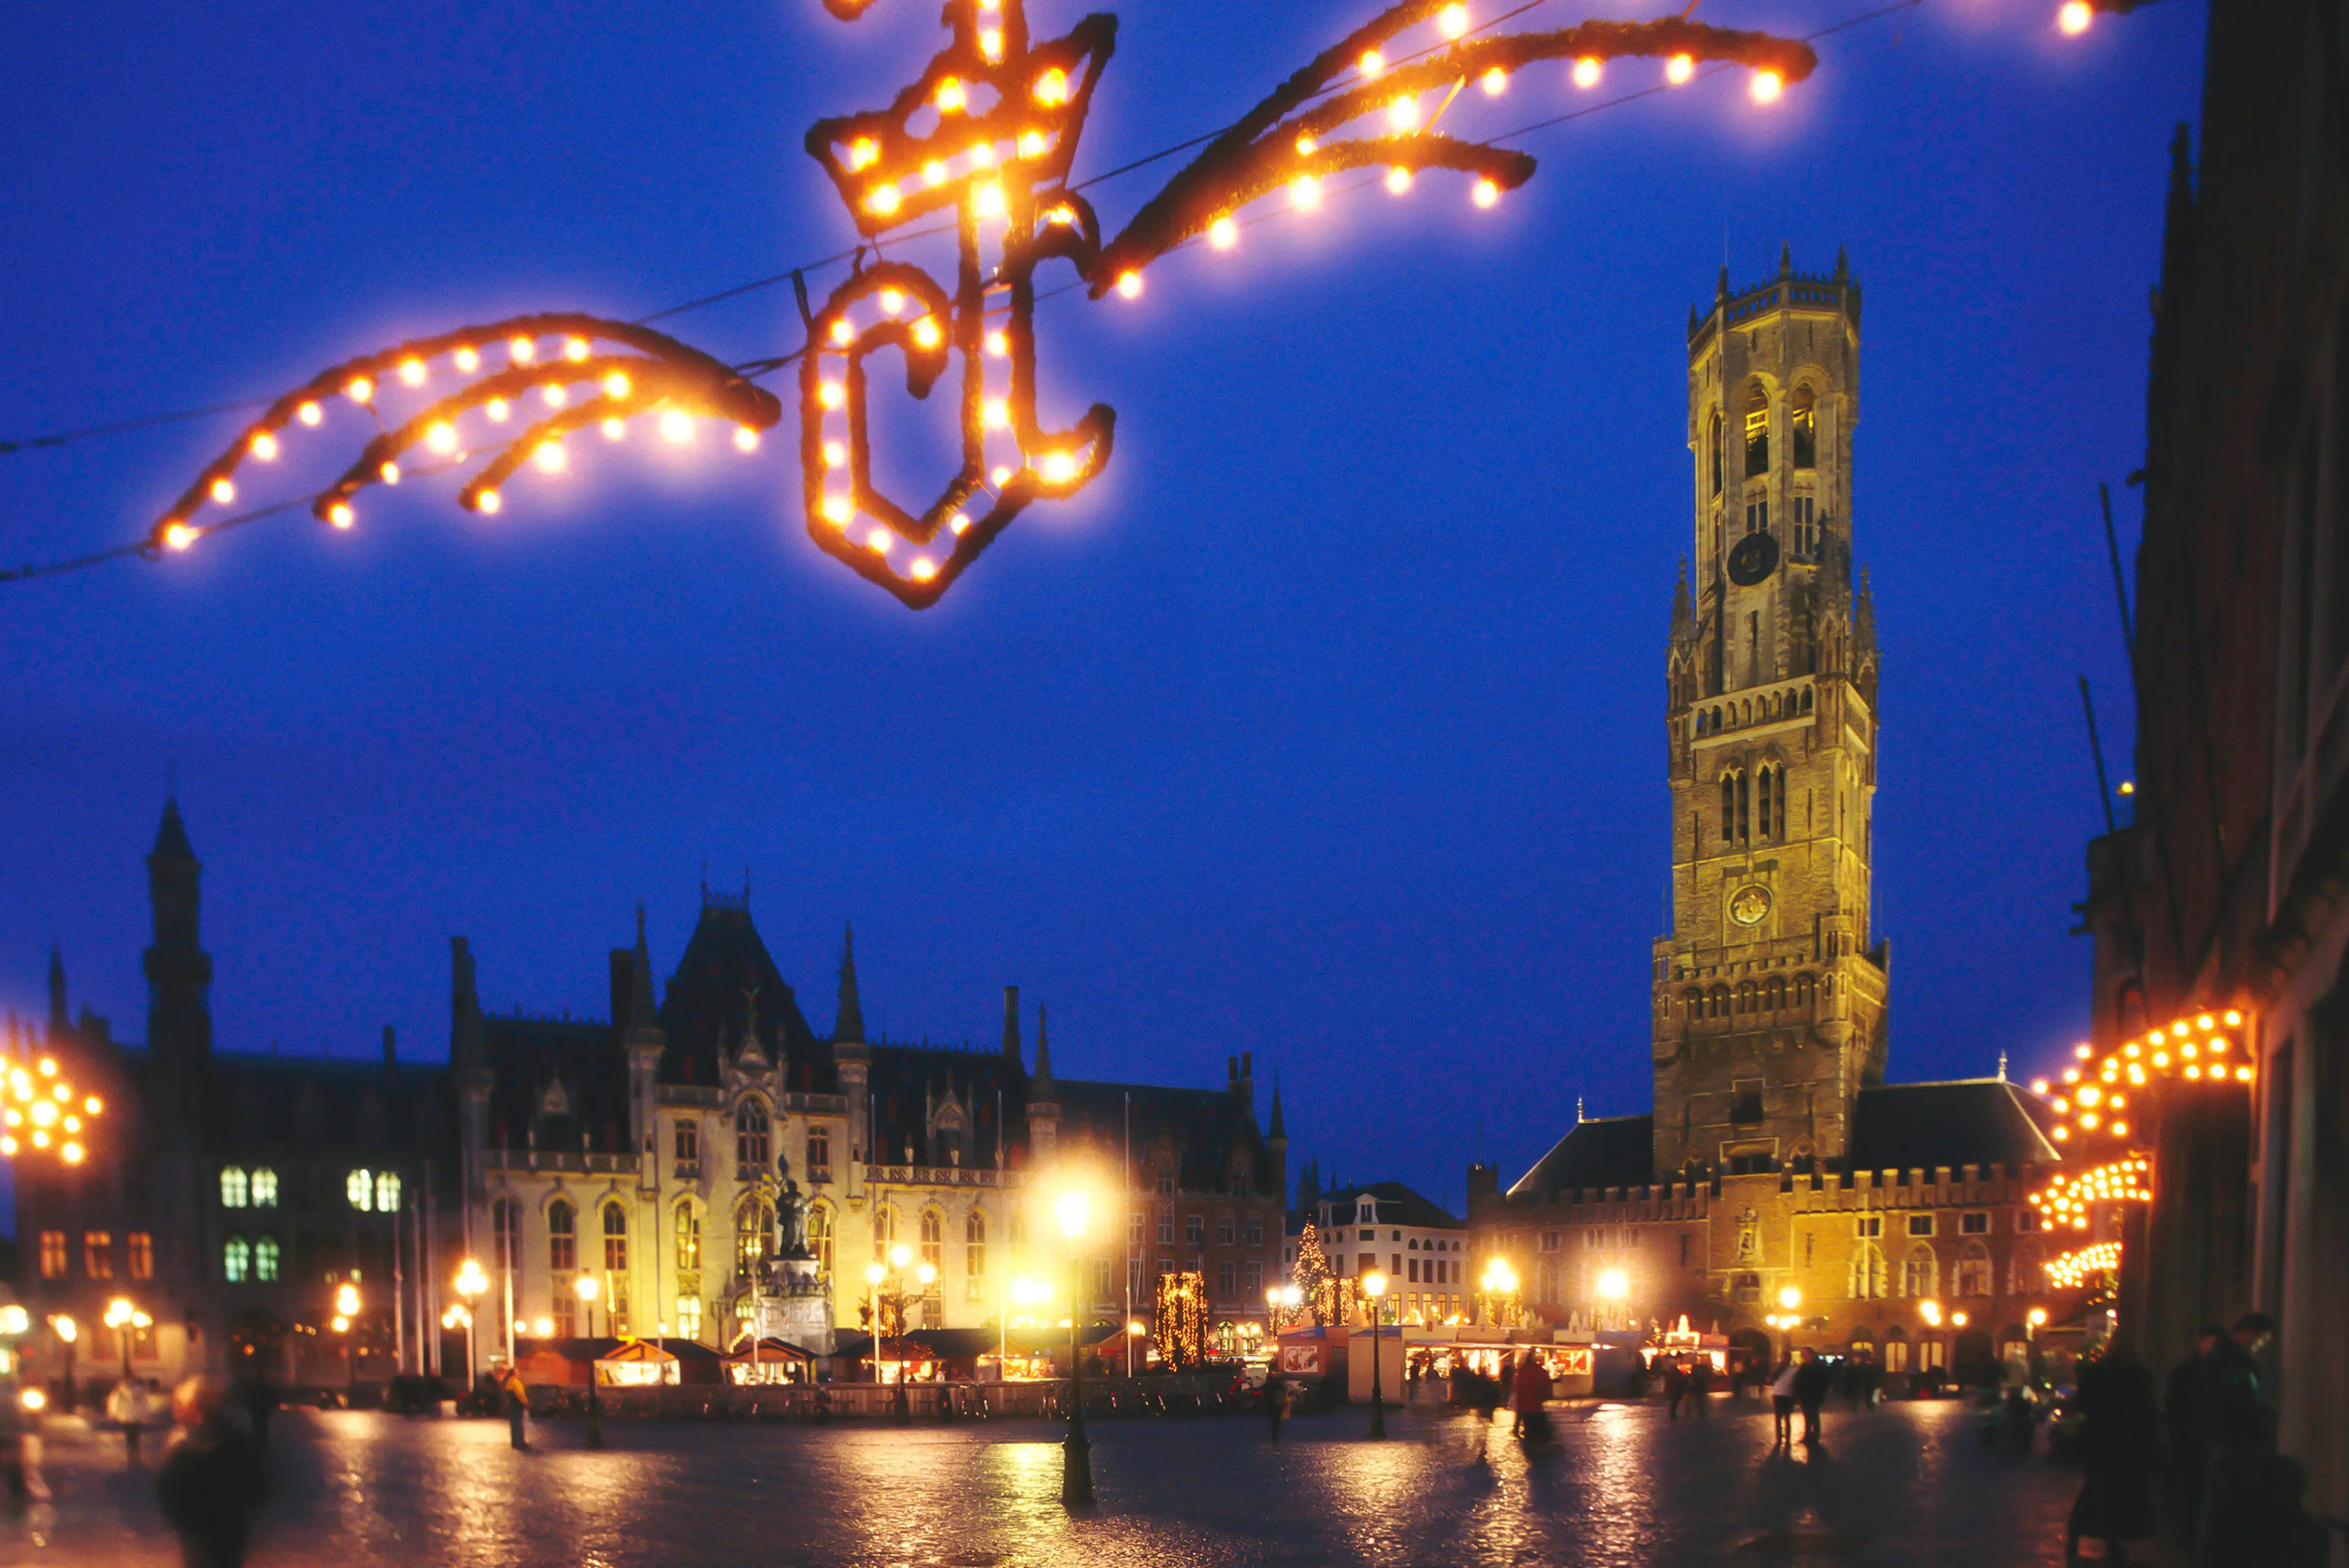 3-Day Magical Christmas Holiday Experience in Bruges, Belgium